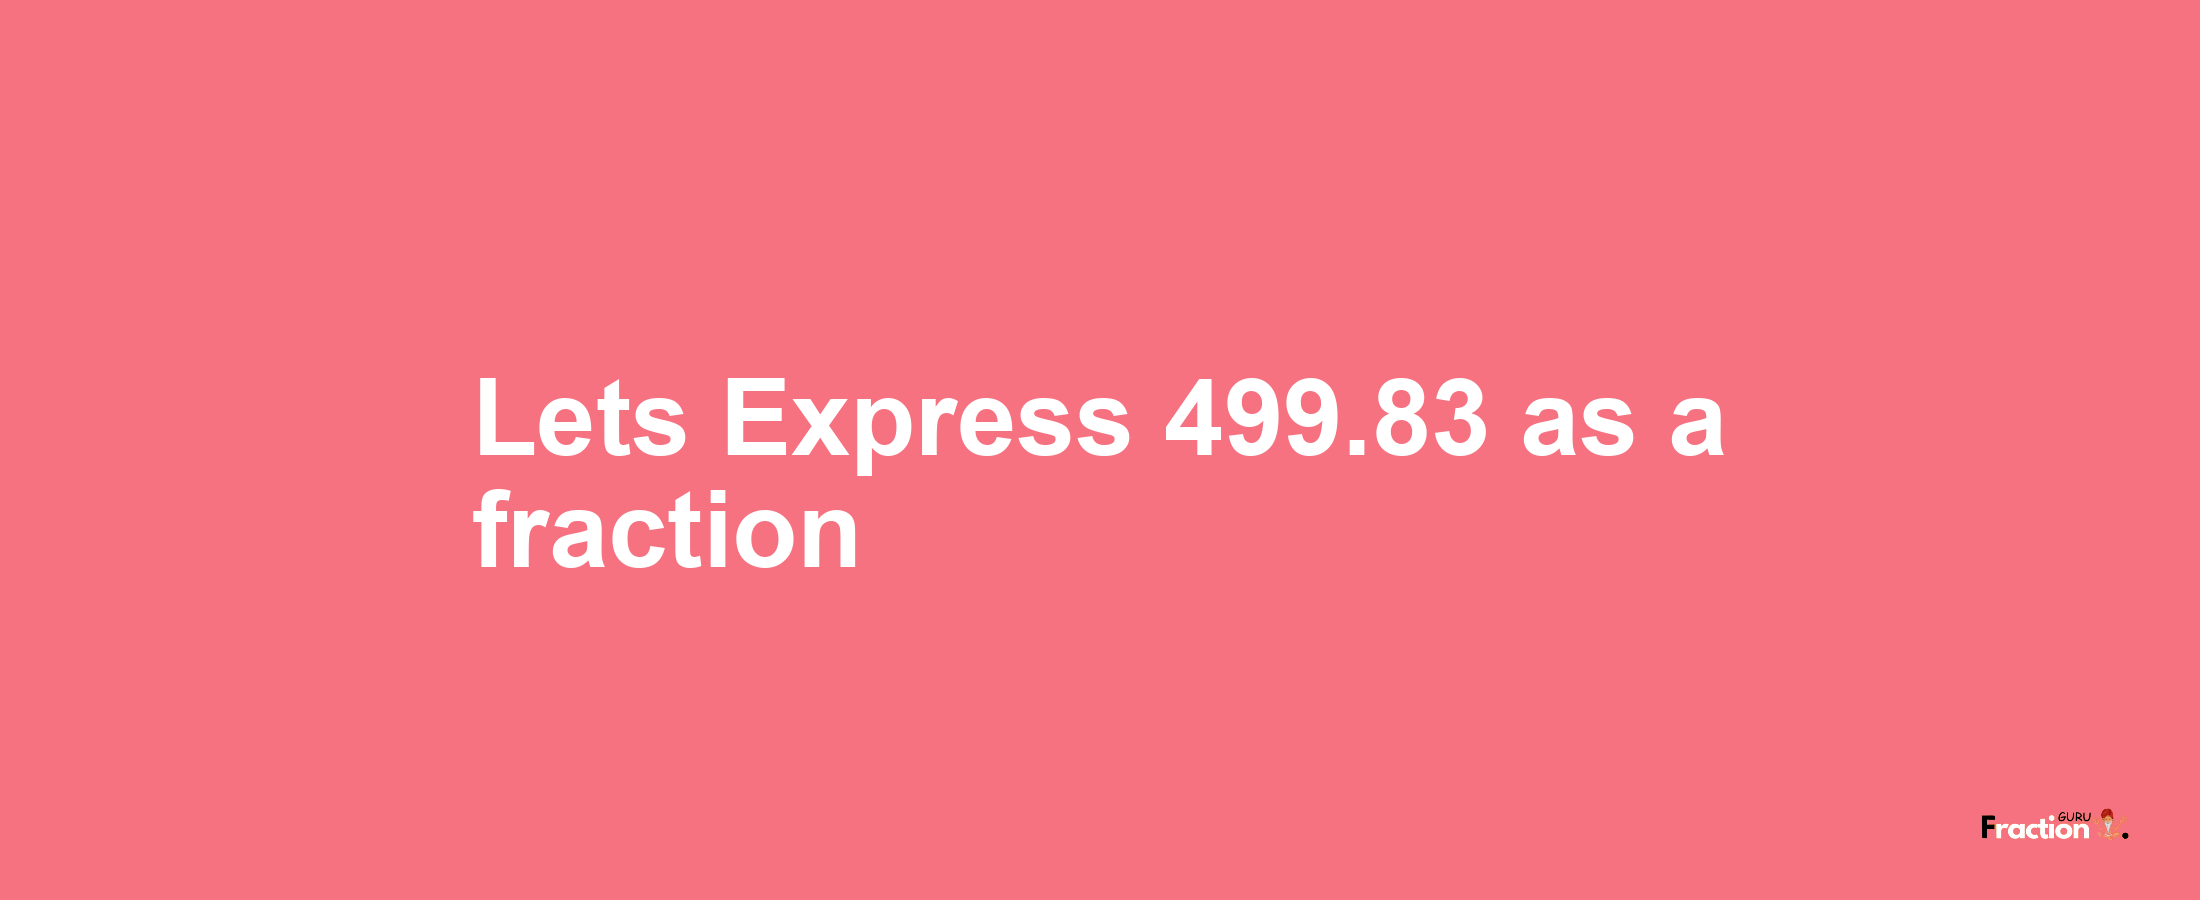 Lets Express 499.83 as afraction